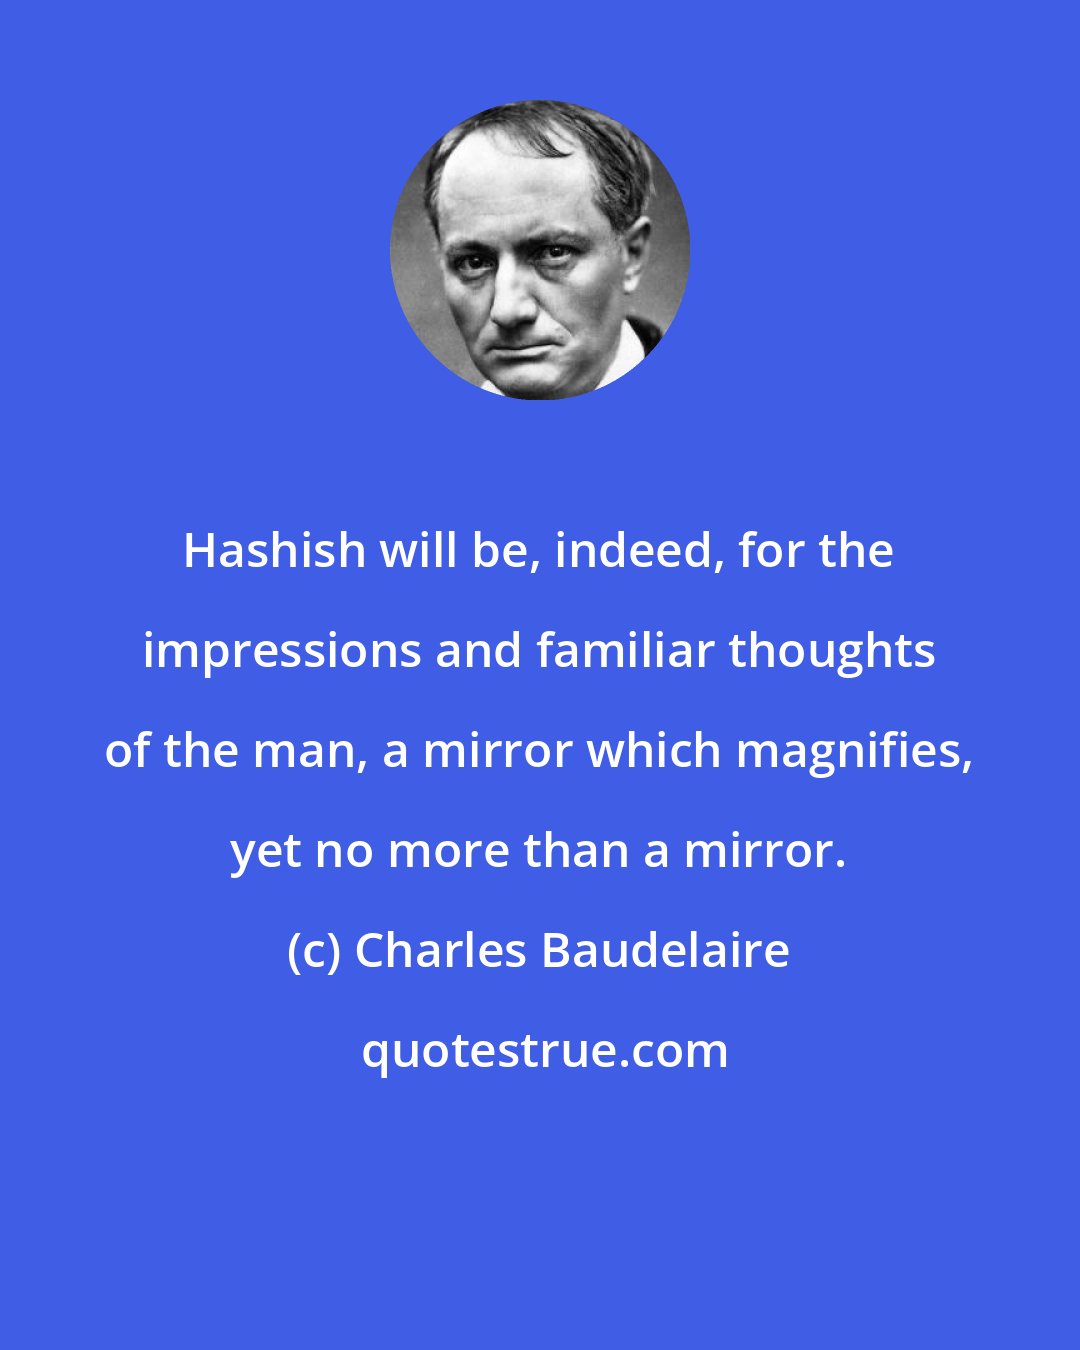 Charles Baudelaire: Hashish will be, indeed, for the impressions and familiar thoughts of the man, a mirror which magnifies, yet no more than a mirror.